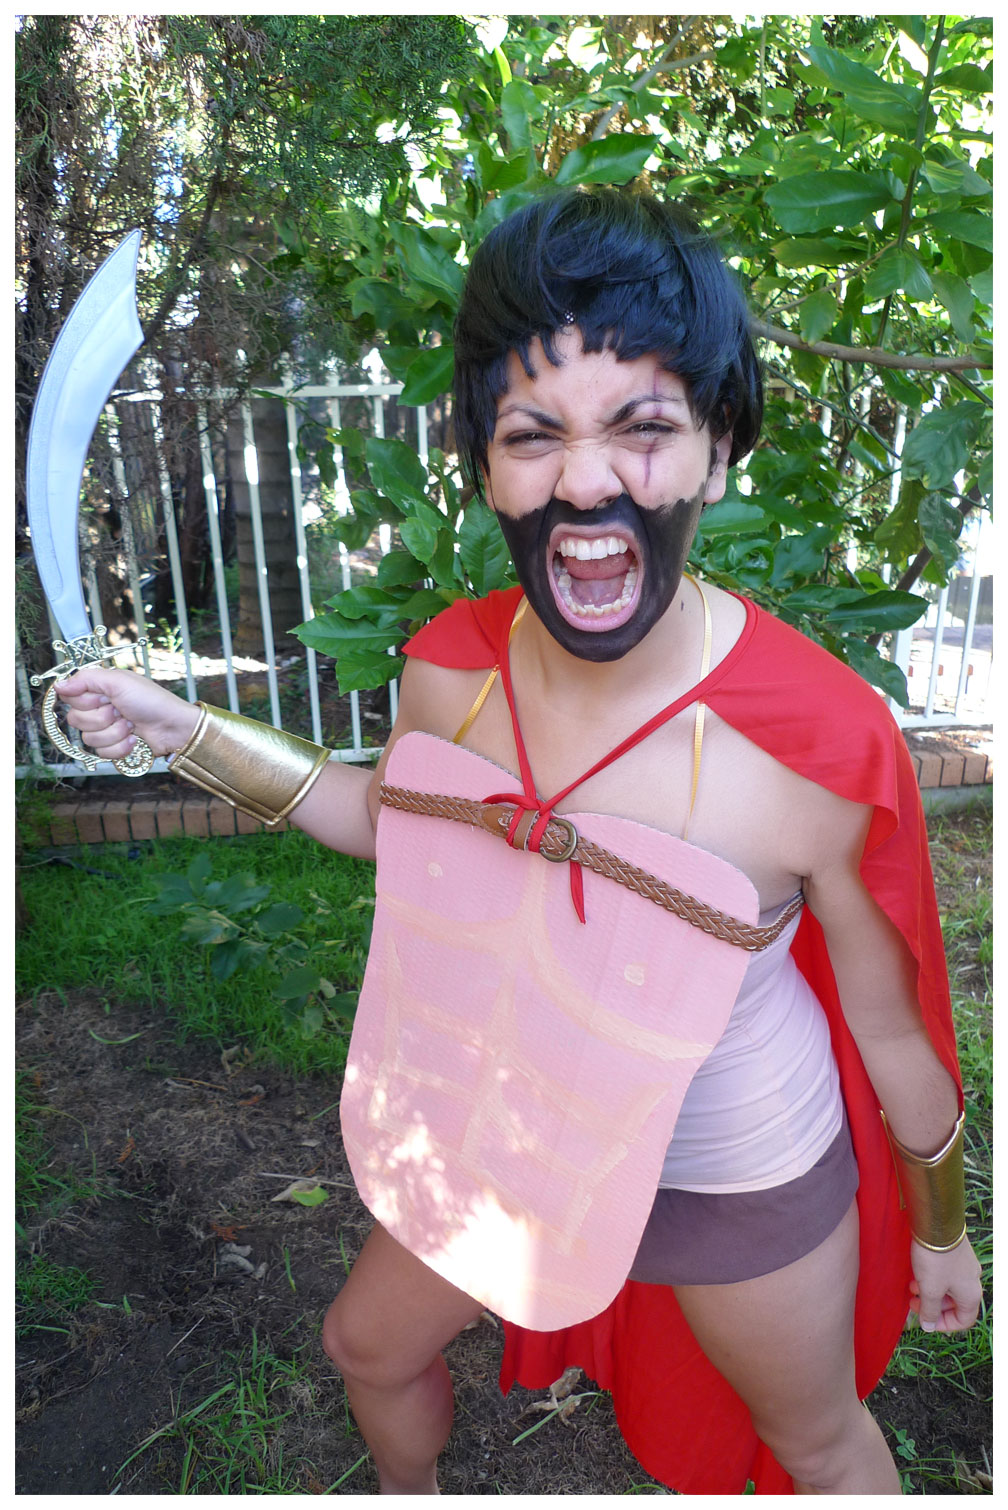 Day 300: This Is Sparta 300 (MEME Week) – Theme Me: Costume, Fancy